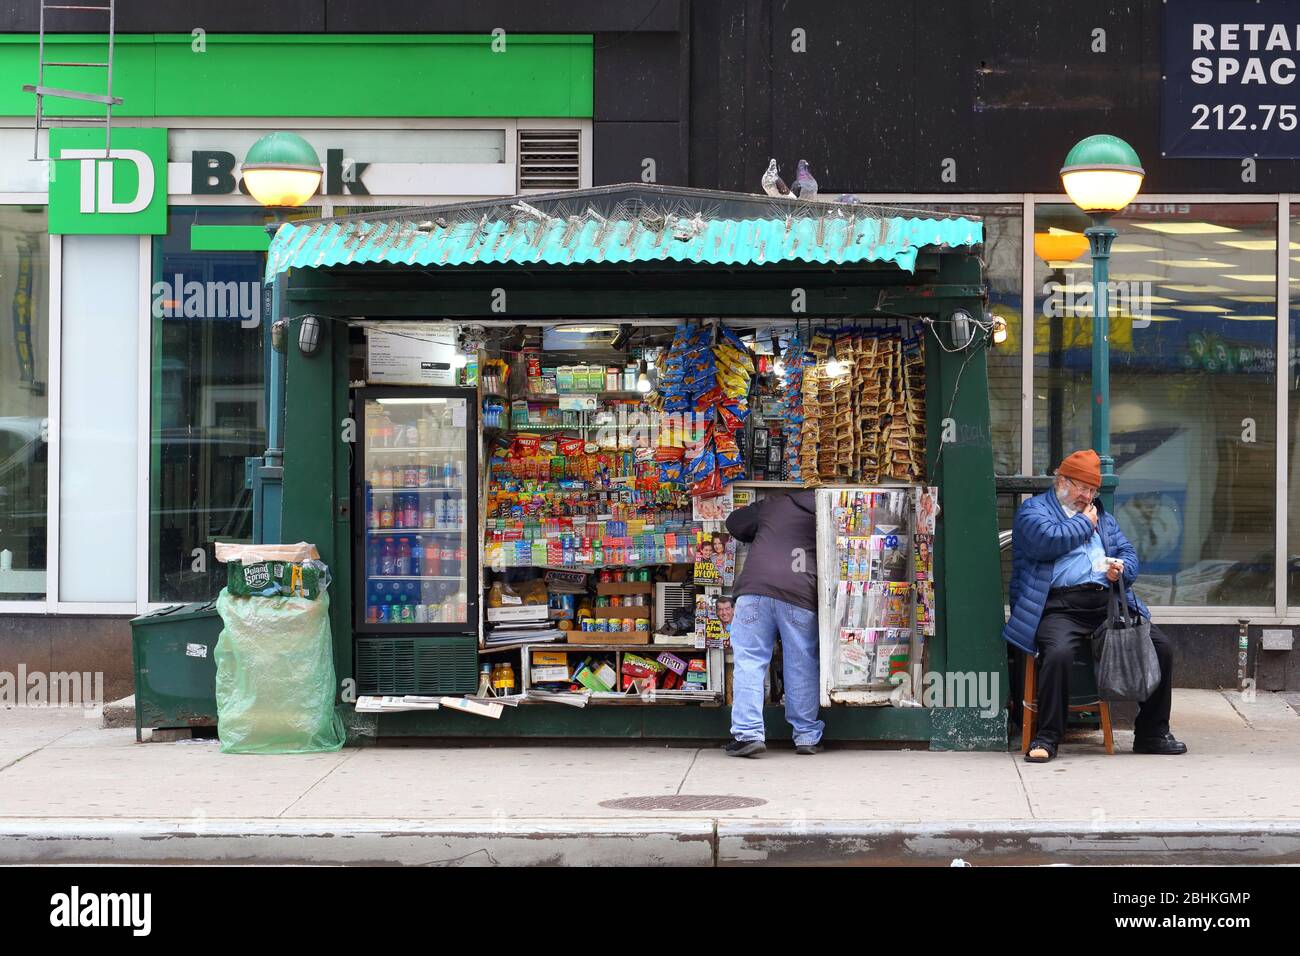 A newspaper stand at East 86th St and Lexington Ave in the Upper East Side of Manhattan. Stock Photo